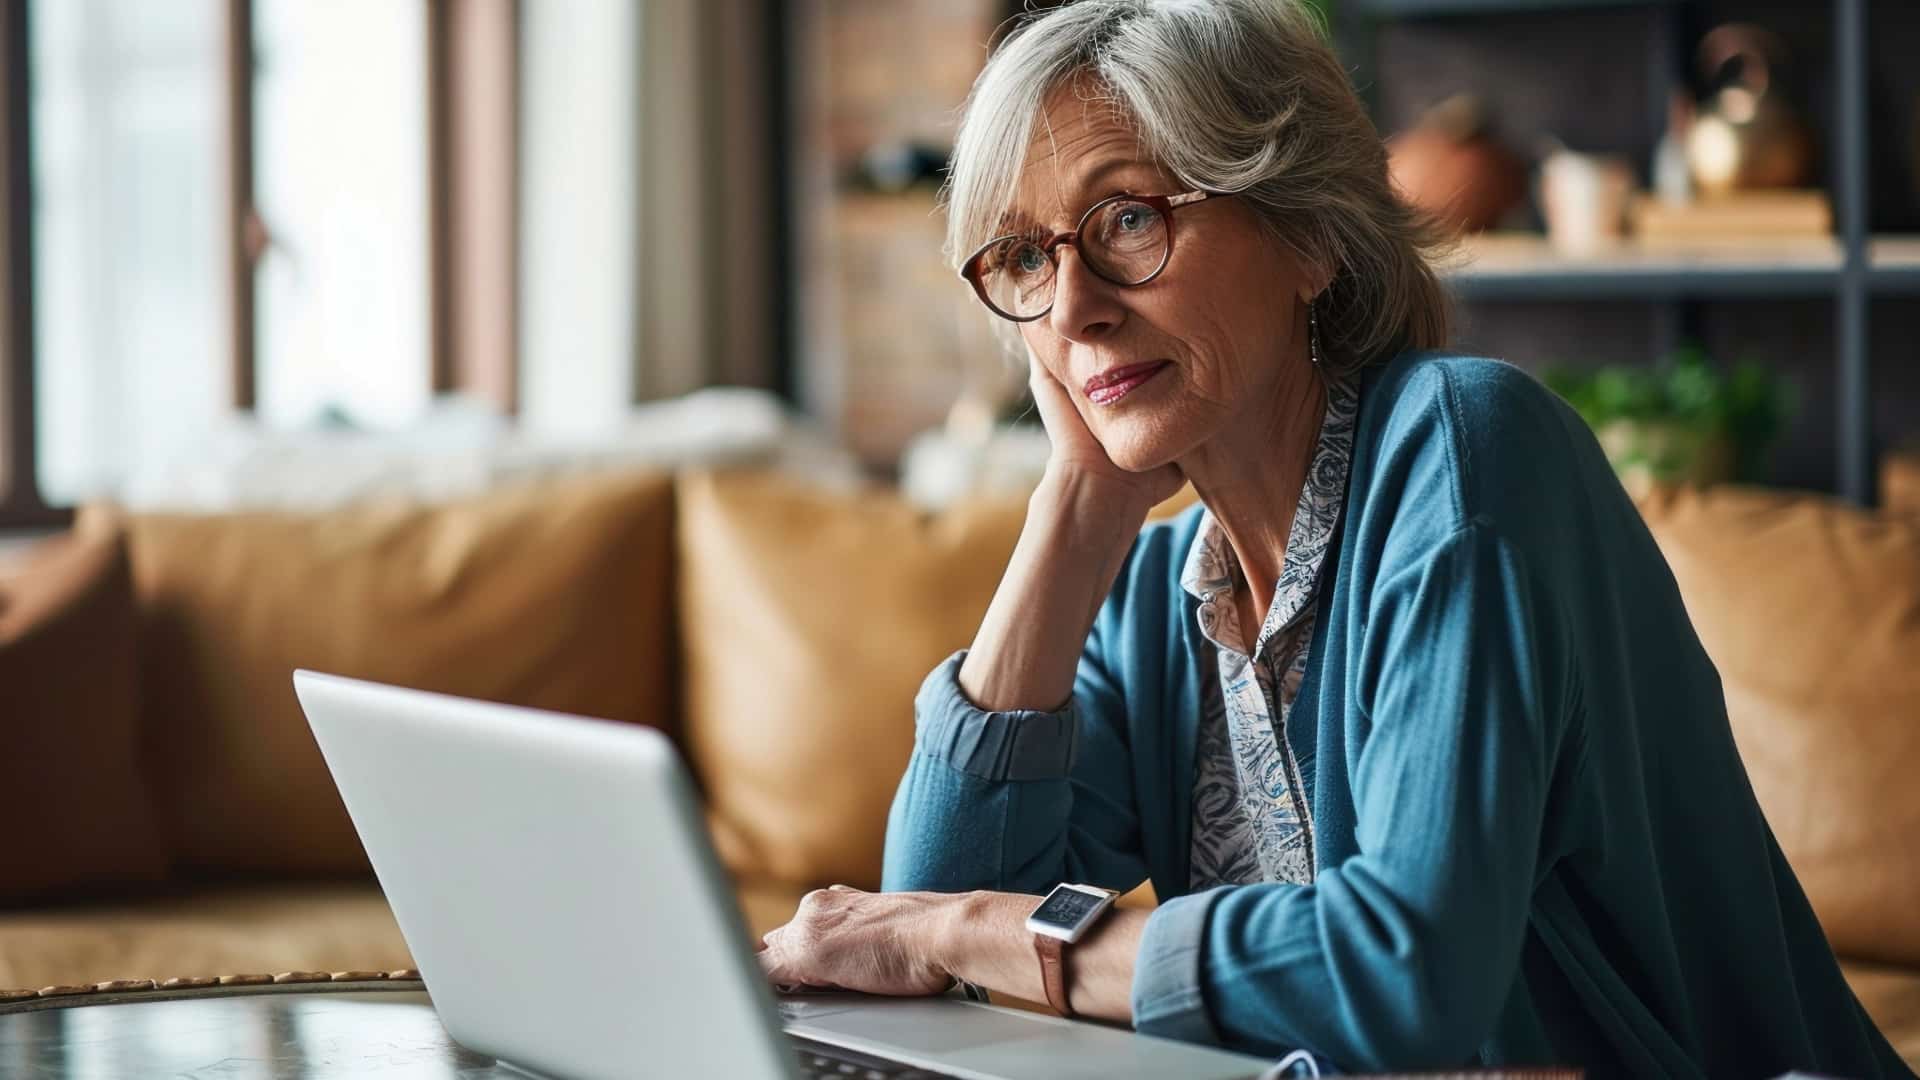 A tired woman with gray hair sitting at a table leaning toward to her laptop participating in therapy for caregiver burnout.